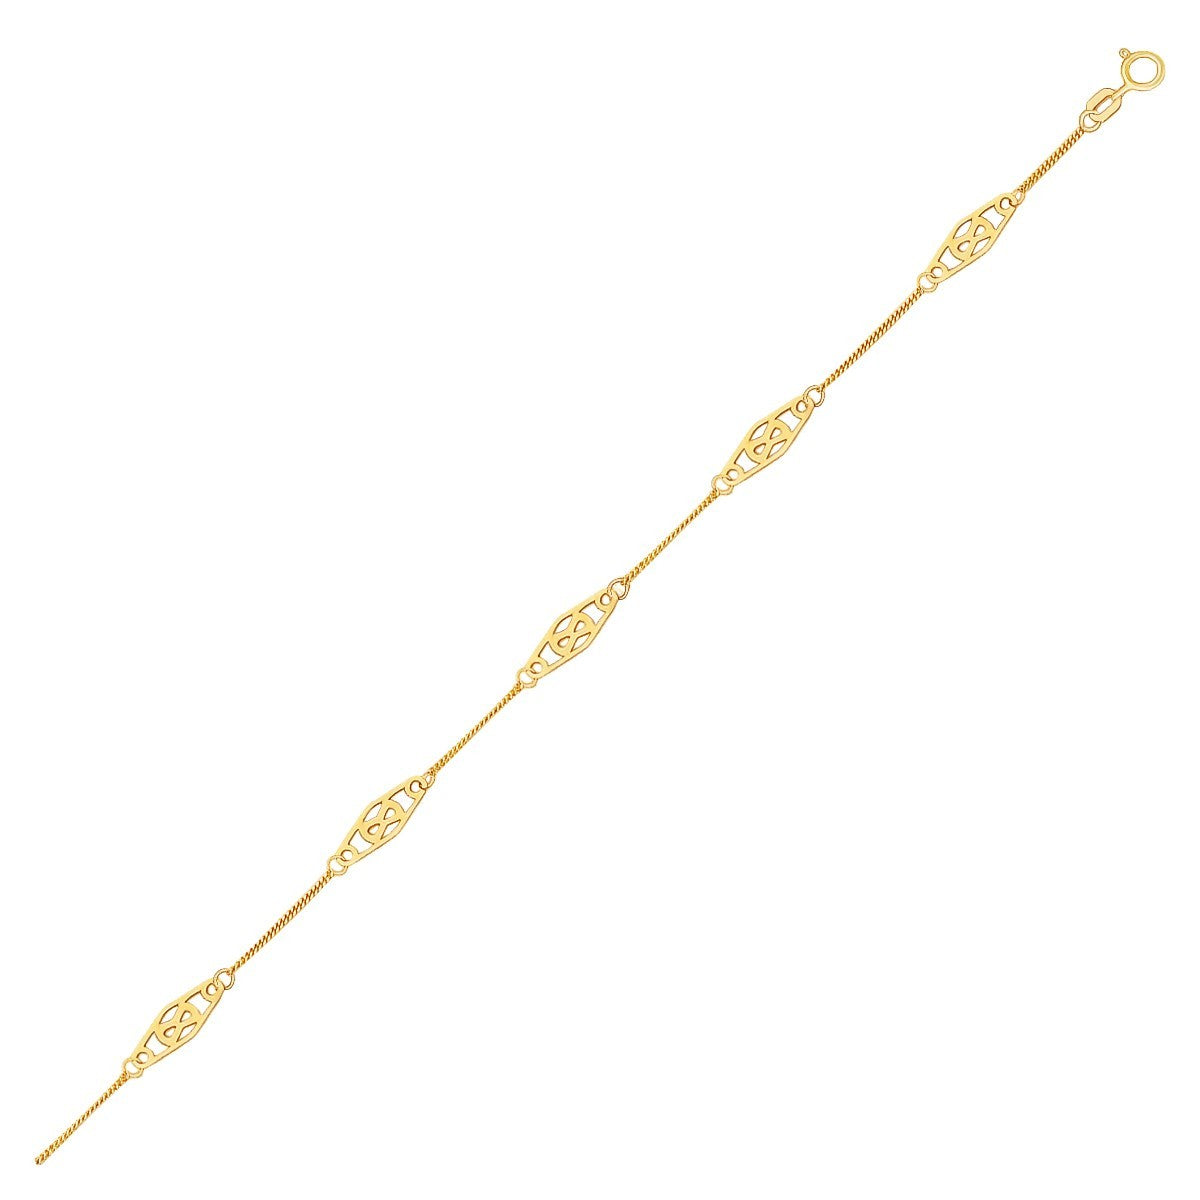 14k Yellow Gold Anklet with Fancy Diamond Shape Filigree Stations, size 10''